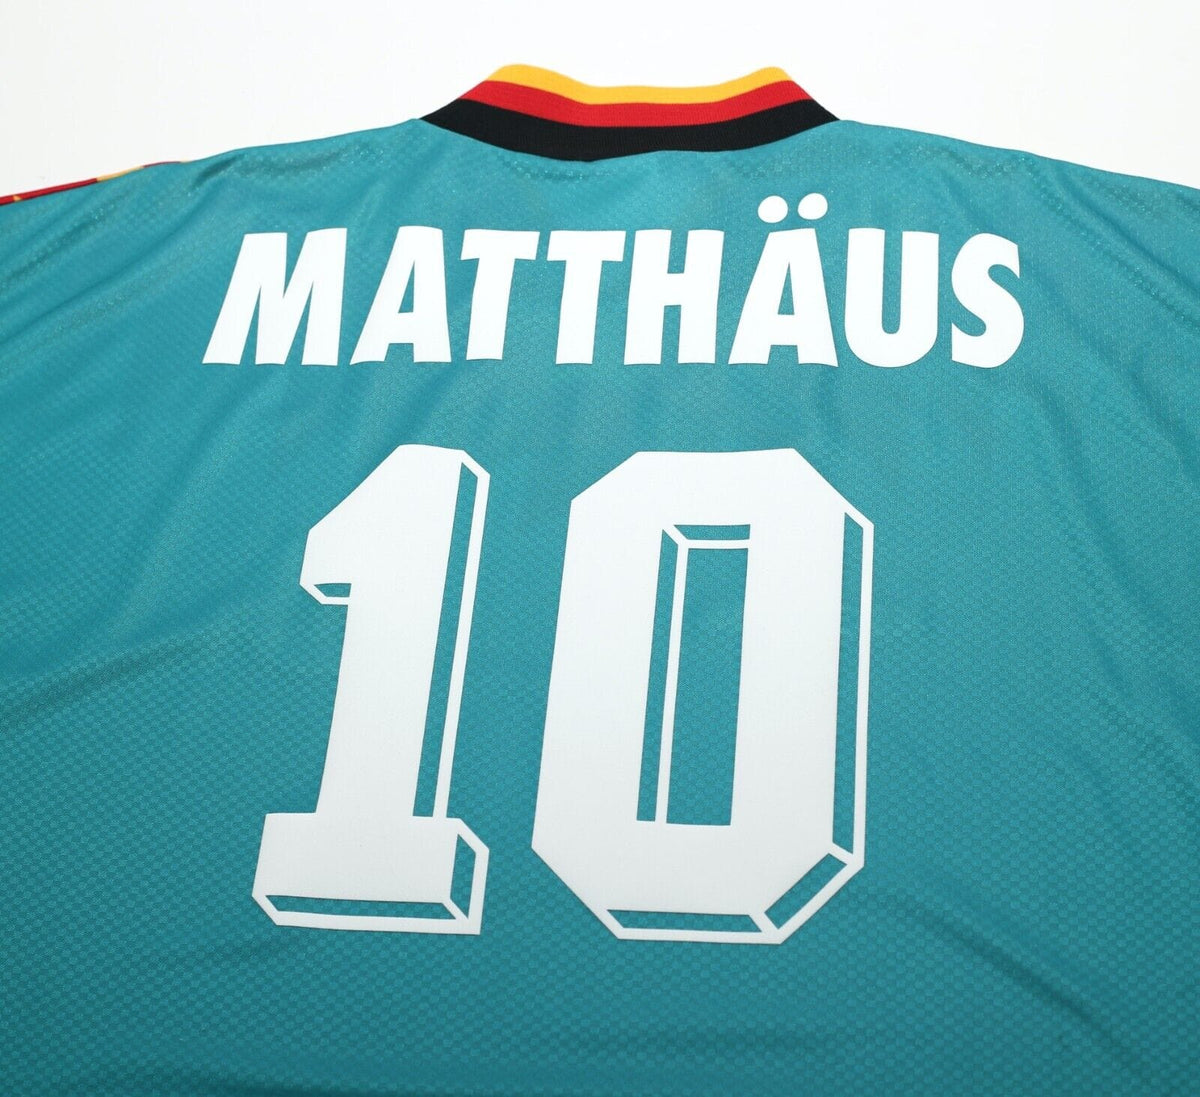 Germany Away 88/90 West Germany - Classic Football Shirts